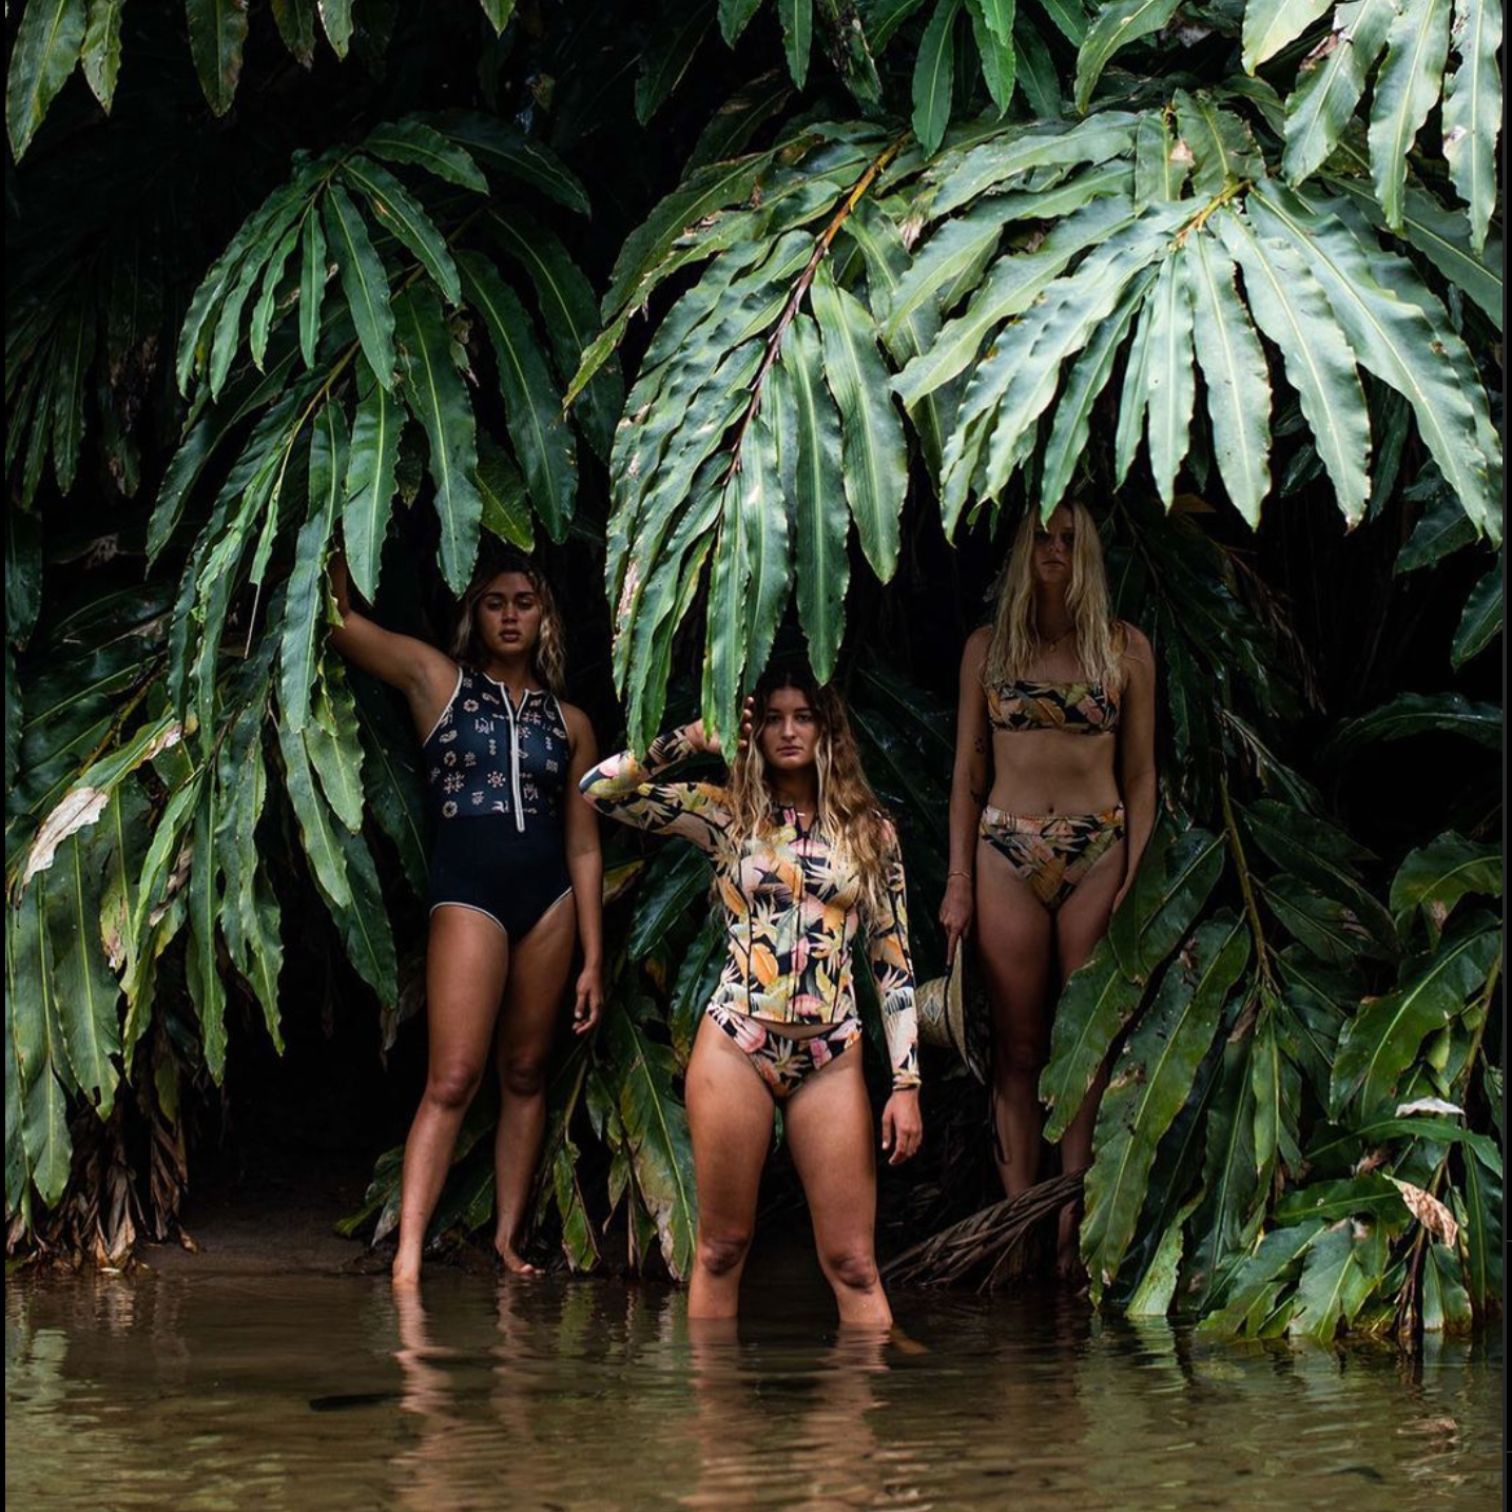 A Group Of Women In Swimsuits Standing In Water